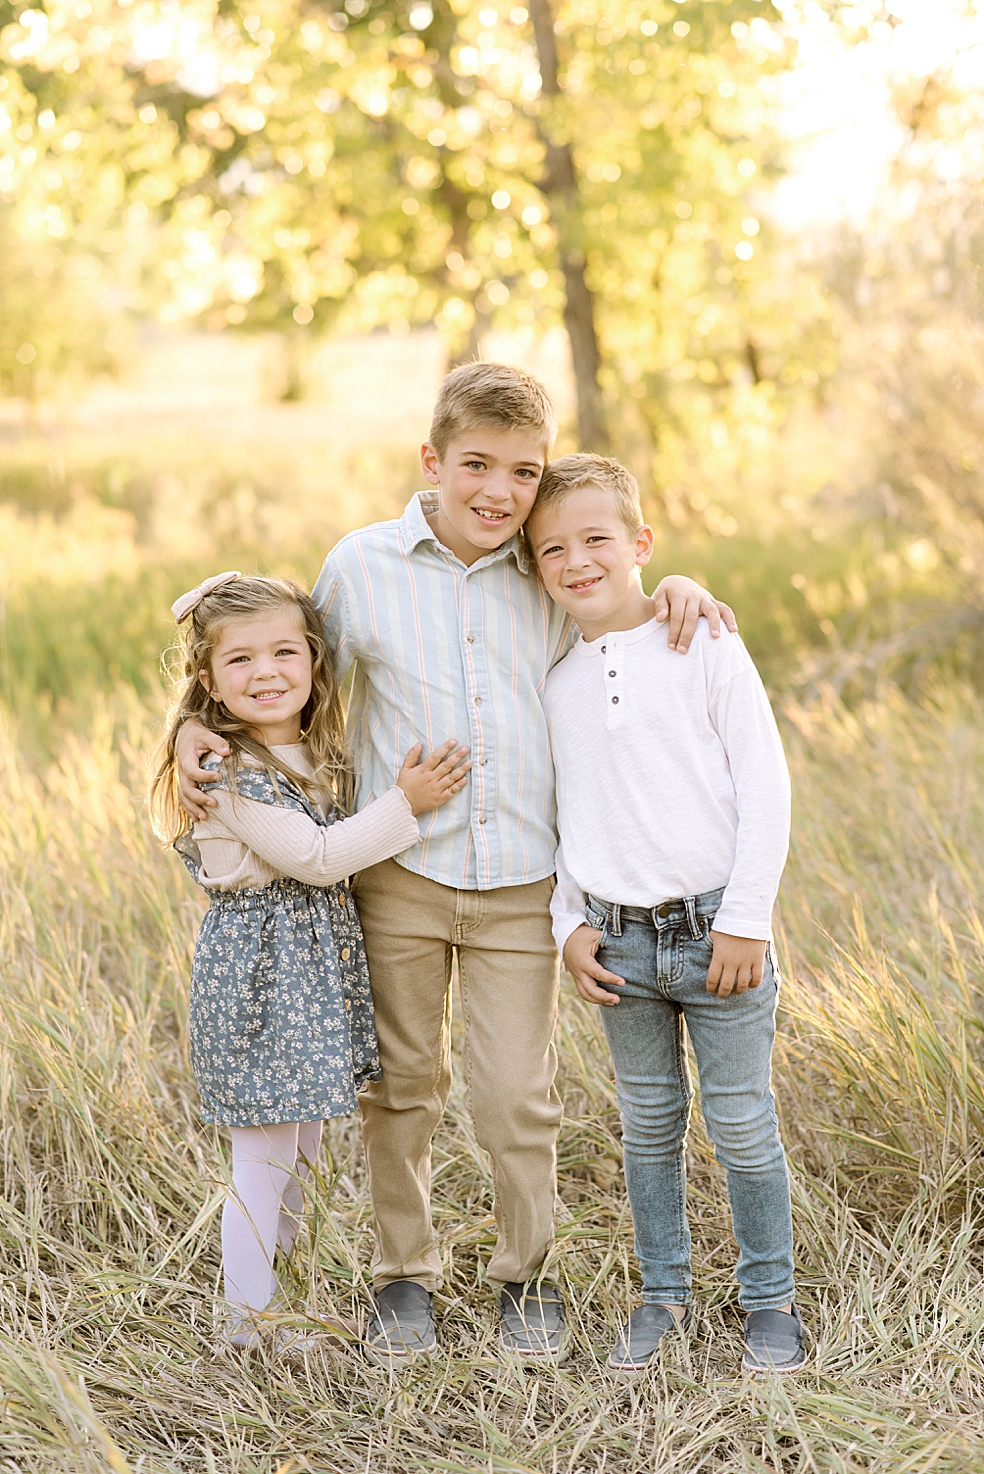 Siblings standing together in a field with golden light | Photo by Madison Alabama Family Photographer Jessica Lee